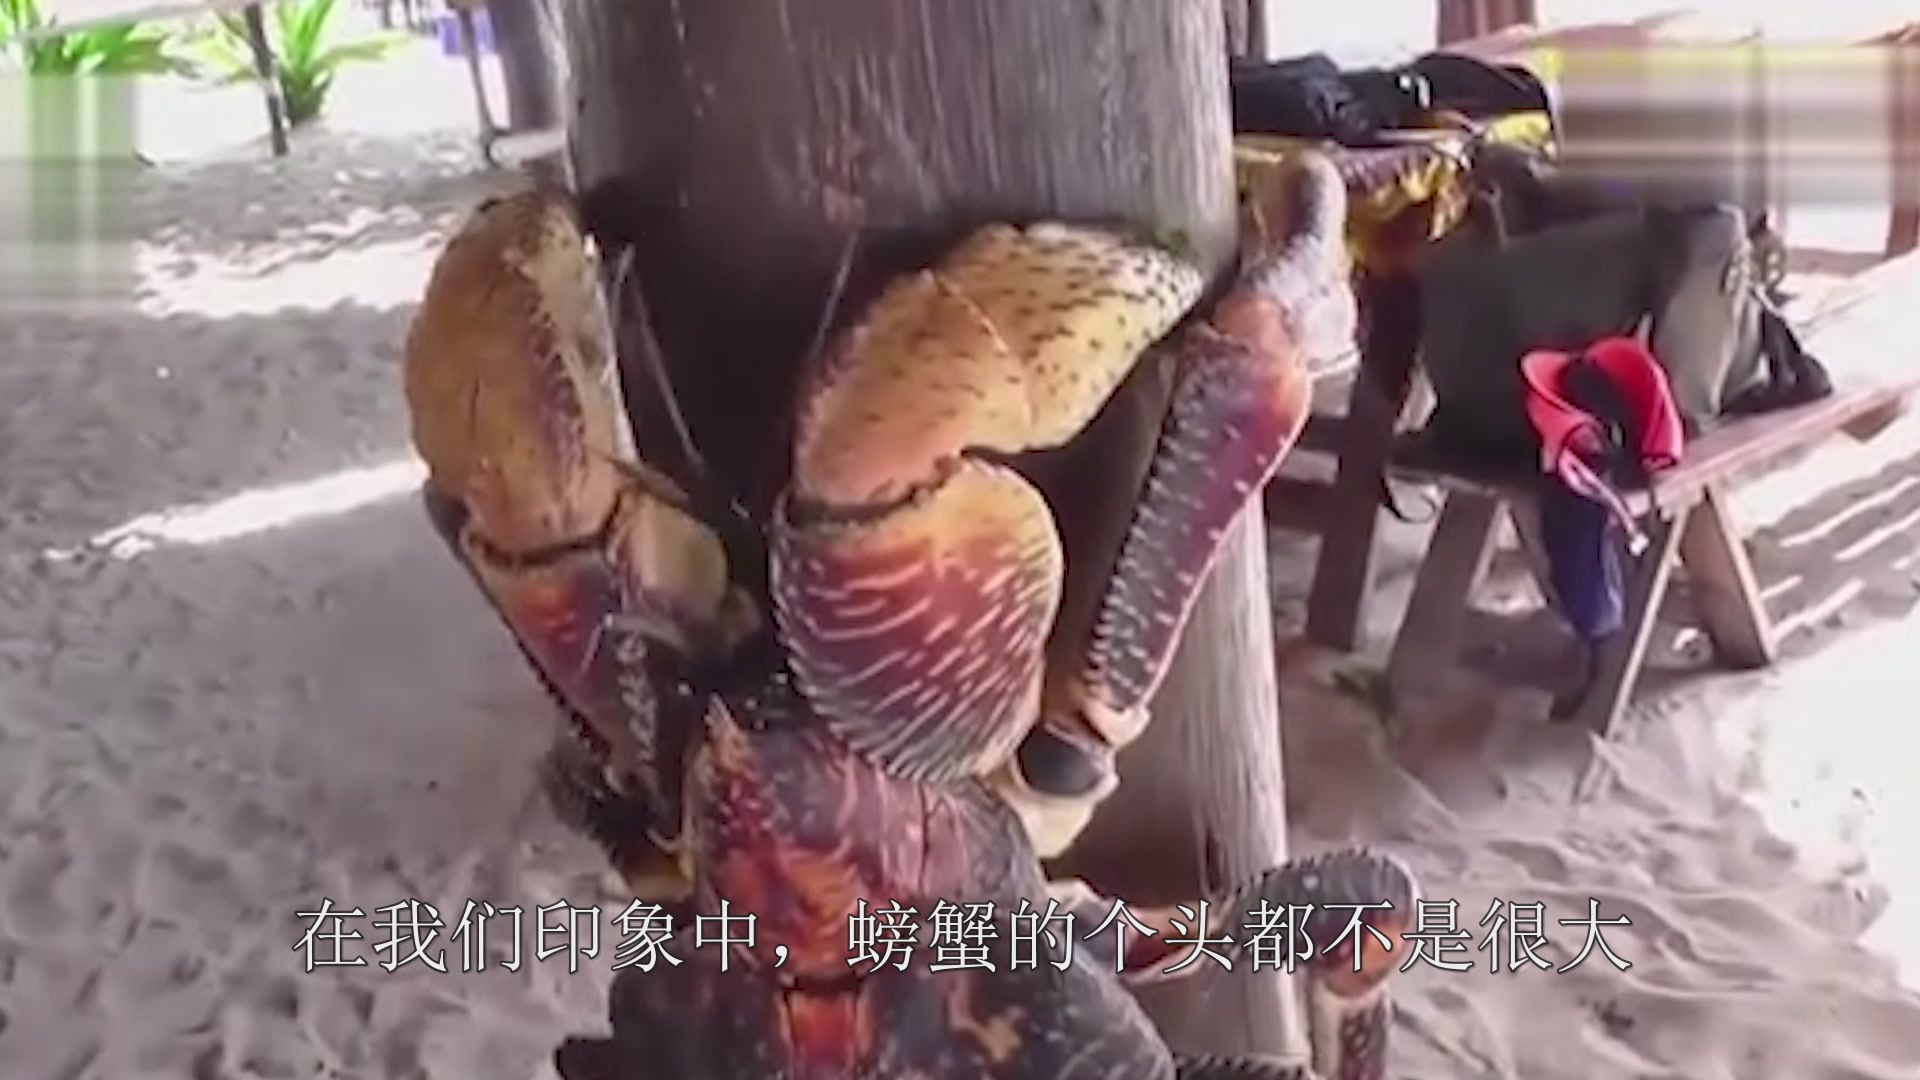 The smartest crab in the world, like to eat coconut meat